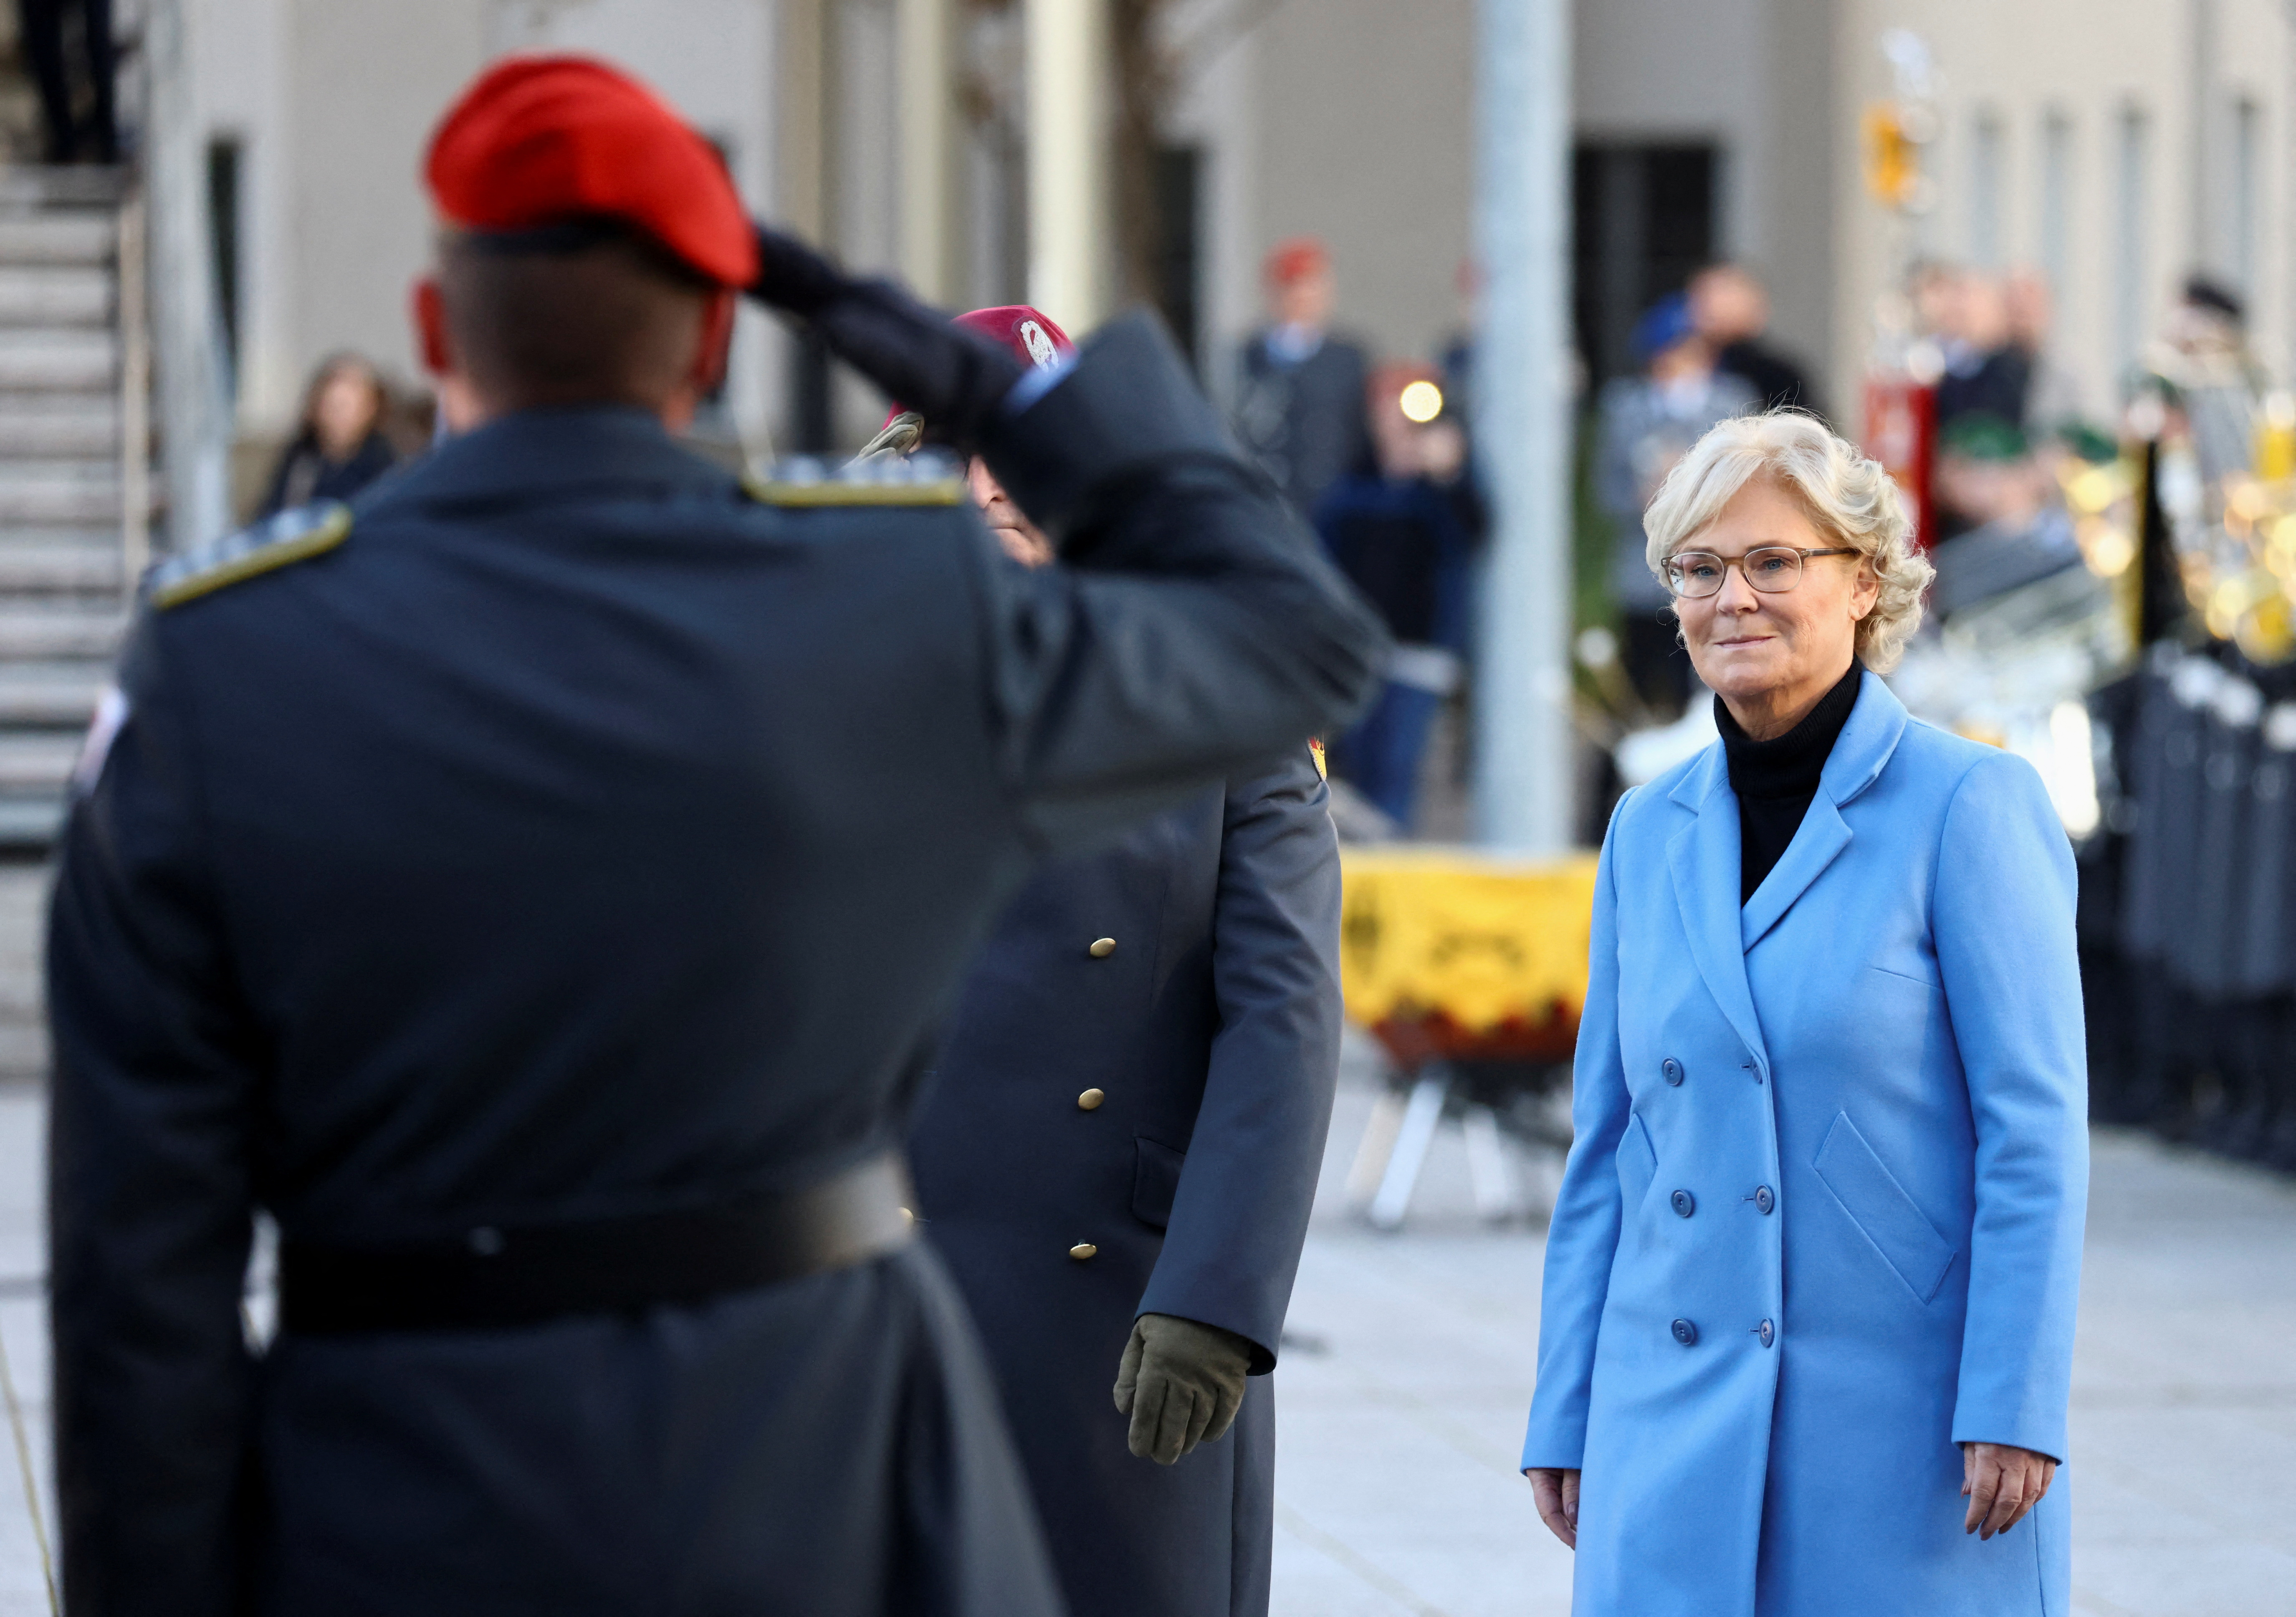 Christine Lambrecht attended a swearing-in ceremony for new recruits at the Bendlerblock, the German Ministry of Defense, in Berlin, last month. Reuters/Christian Mang